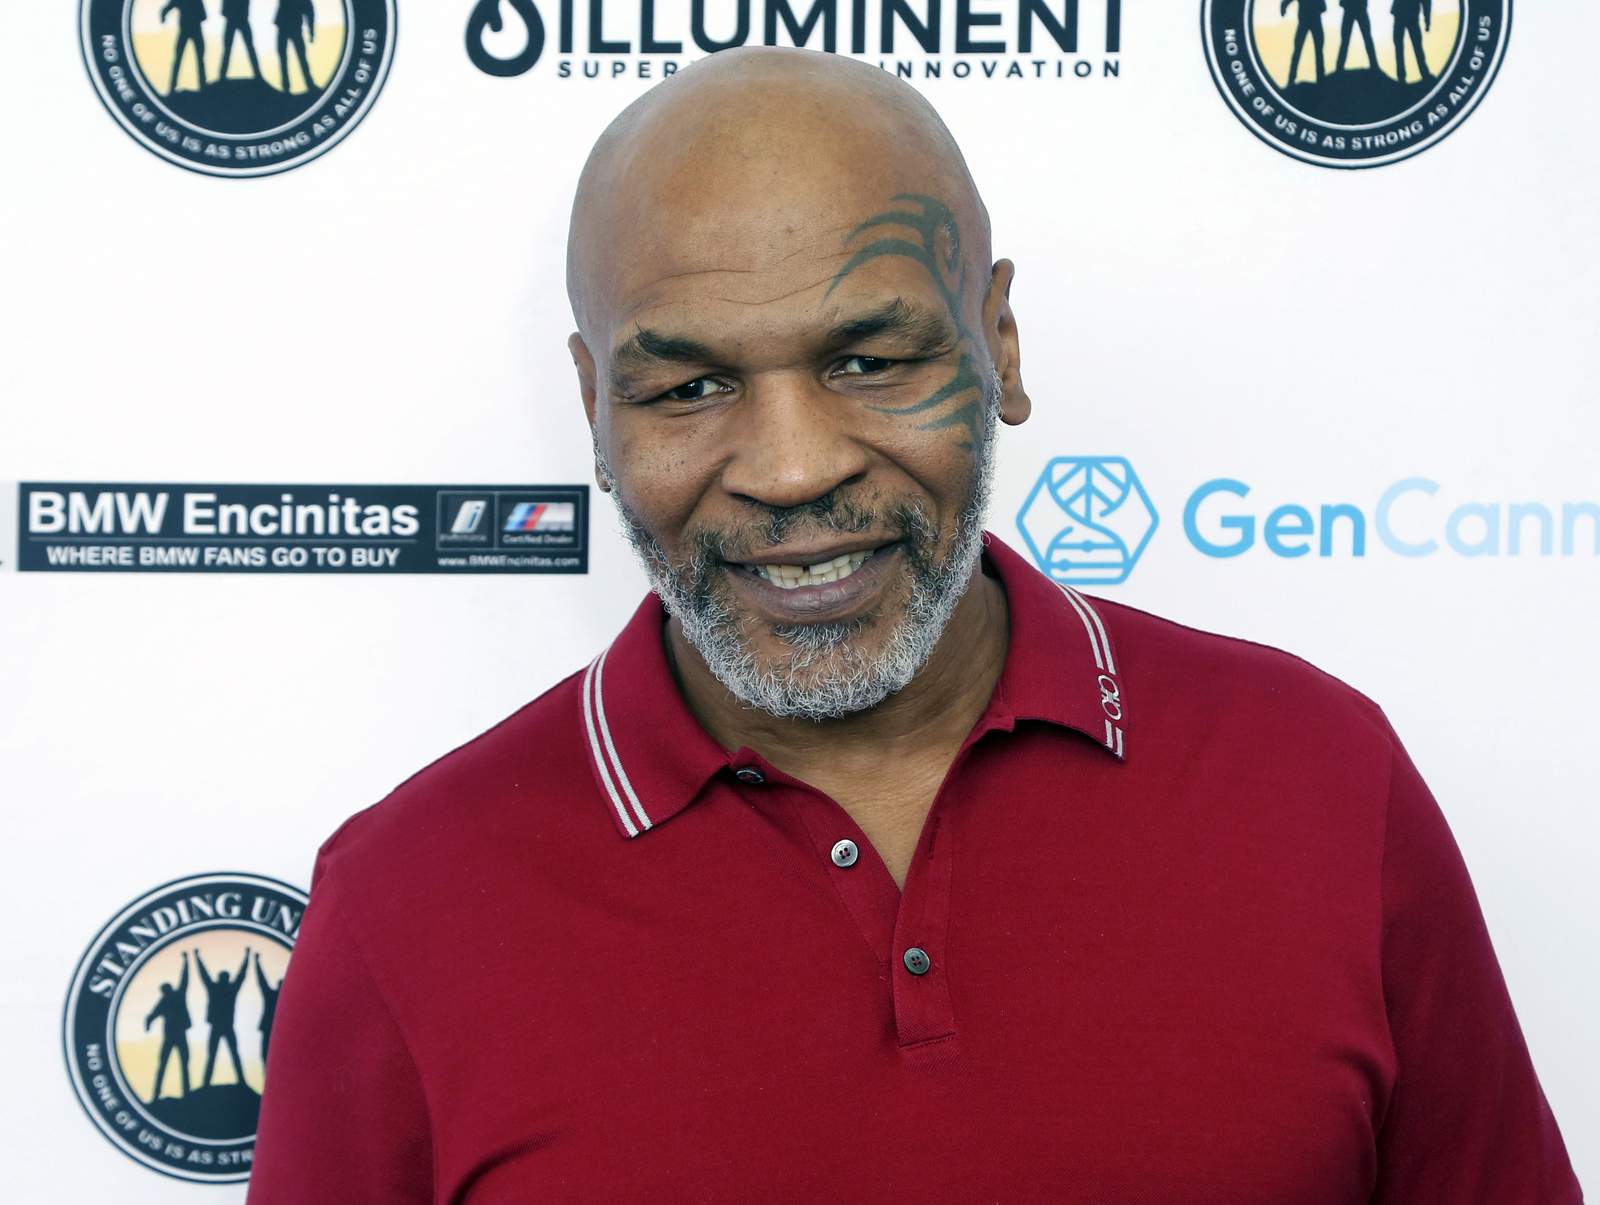 Mike Tyson, Roy Jones promise a fight in "exhibition" return